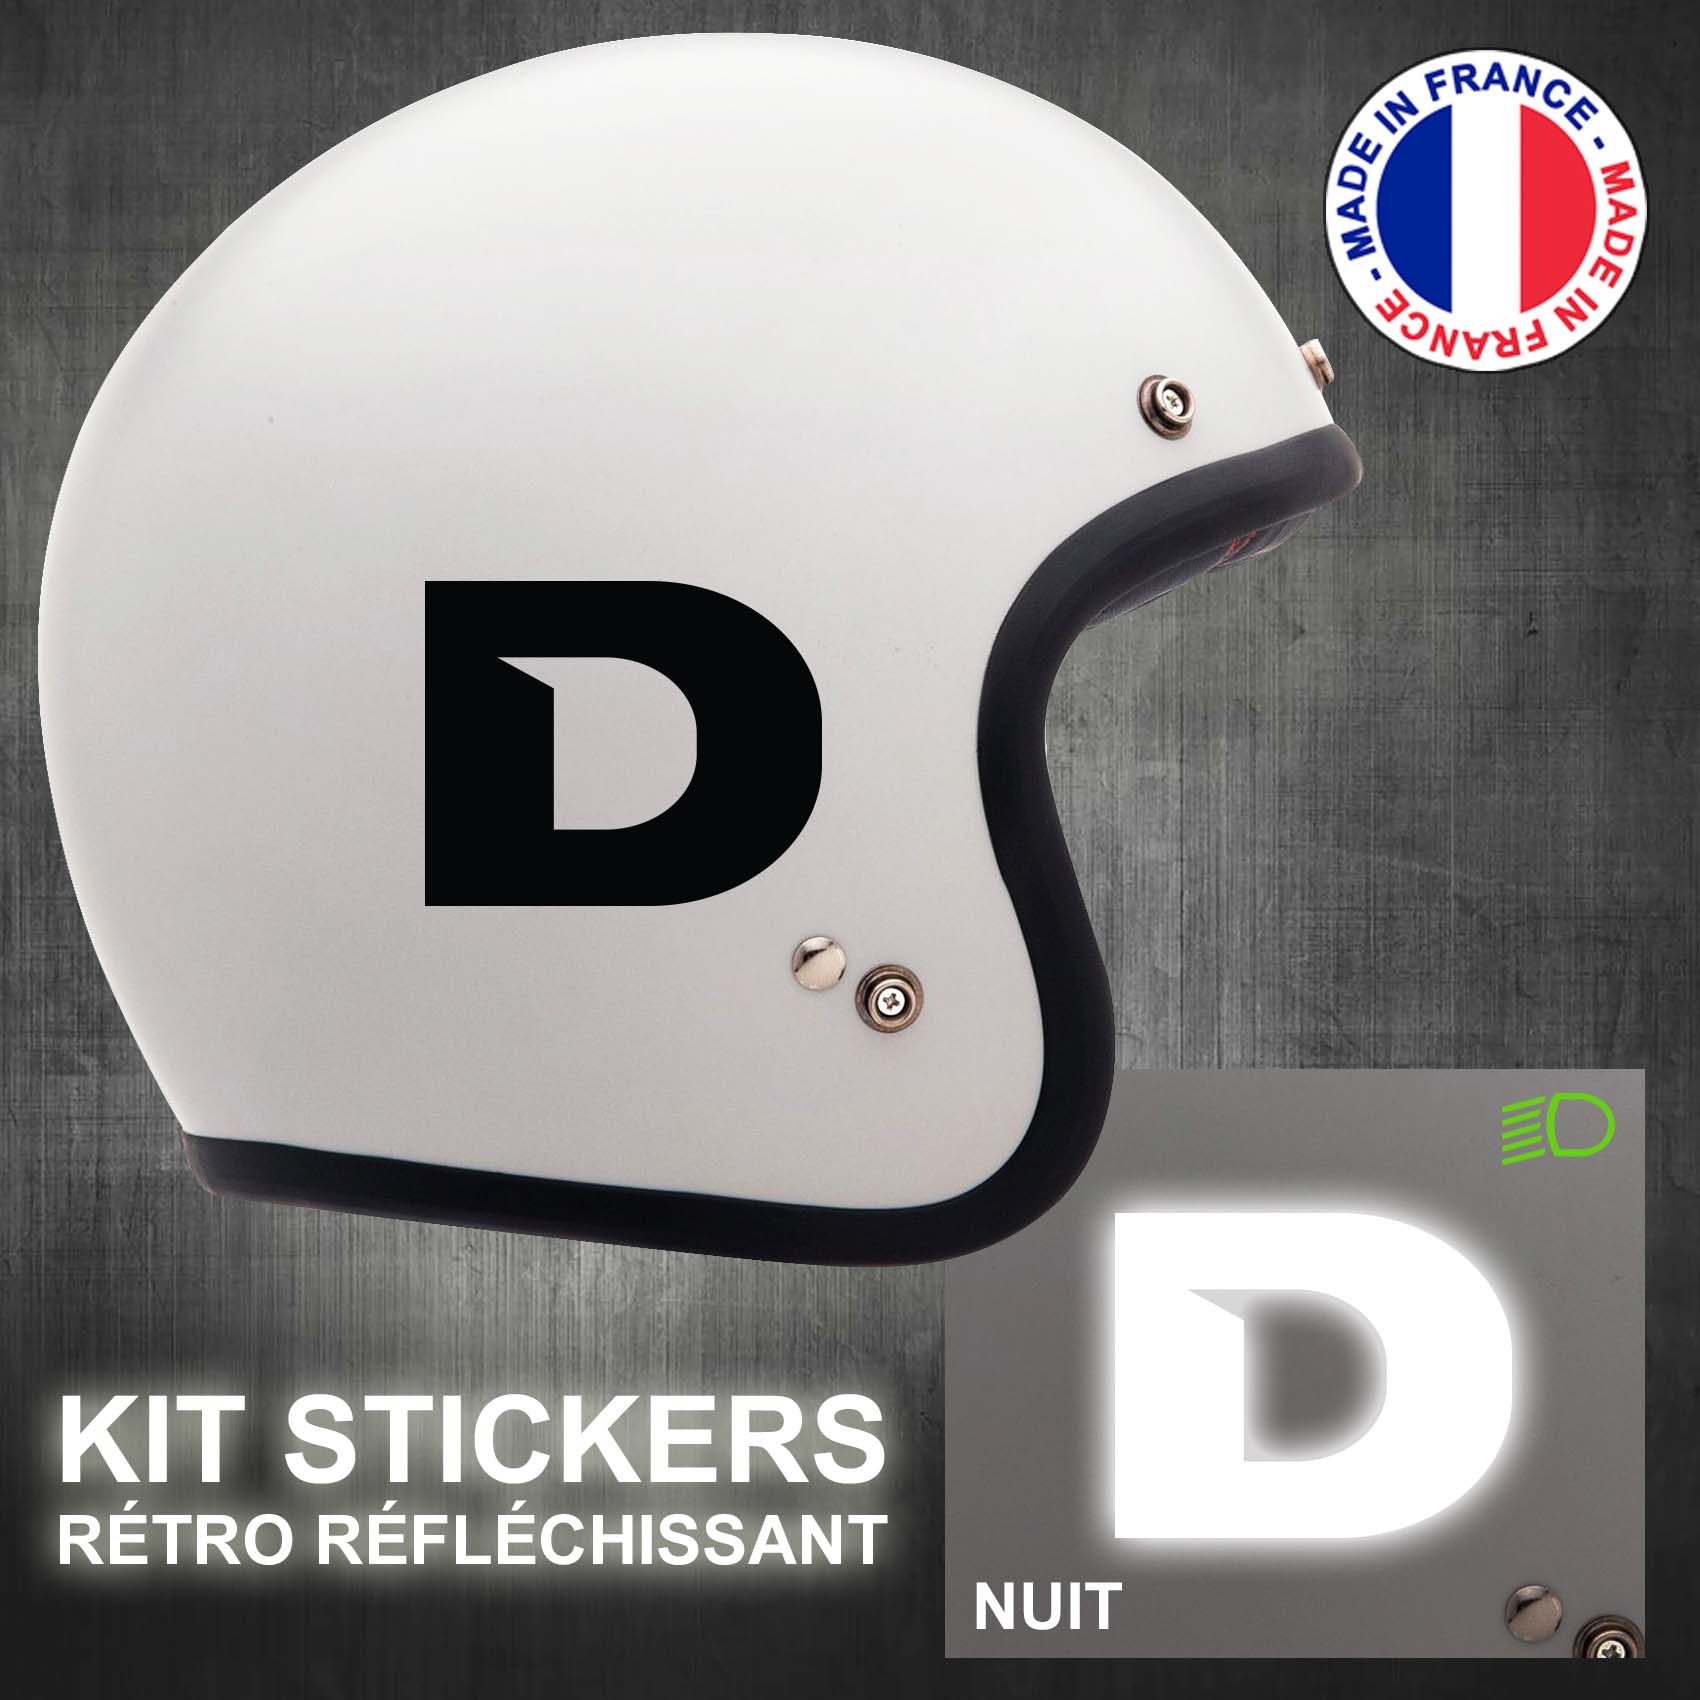 stickers-casque-moto-derbi-ref5-retro-reflechissant-autocollant-blanc-moto-velo-tuning-racing-route-sticker-casques-adhesif-scooter-nuit-securite-decals-personnalise-personnalisable-min